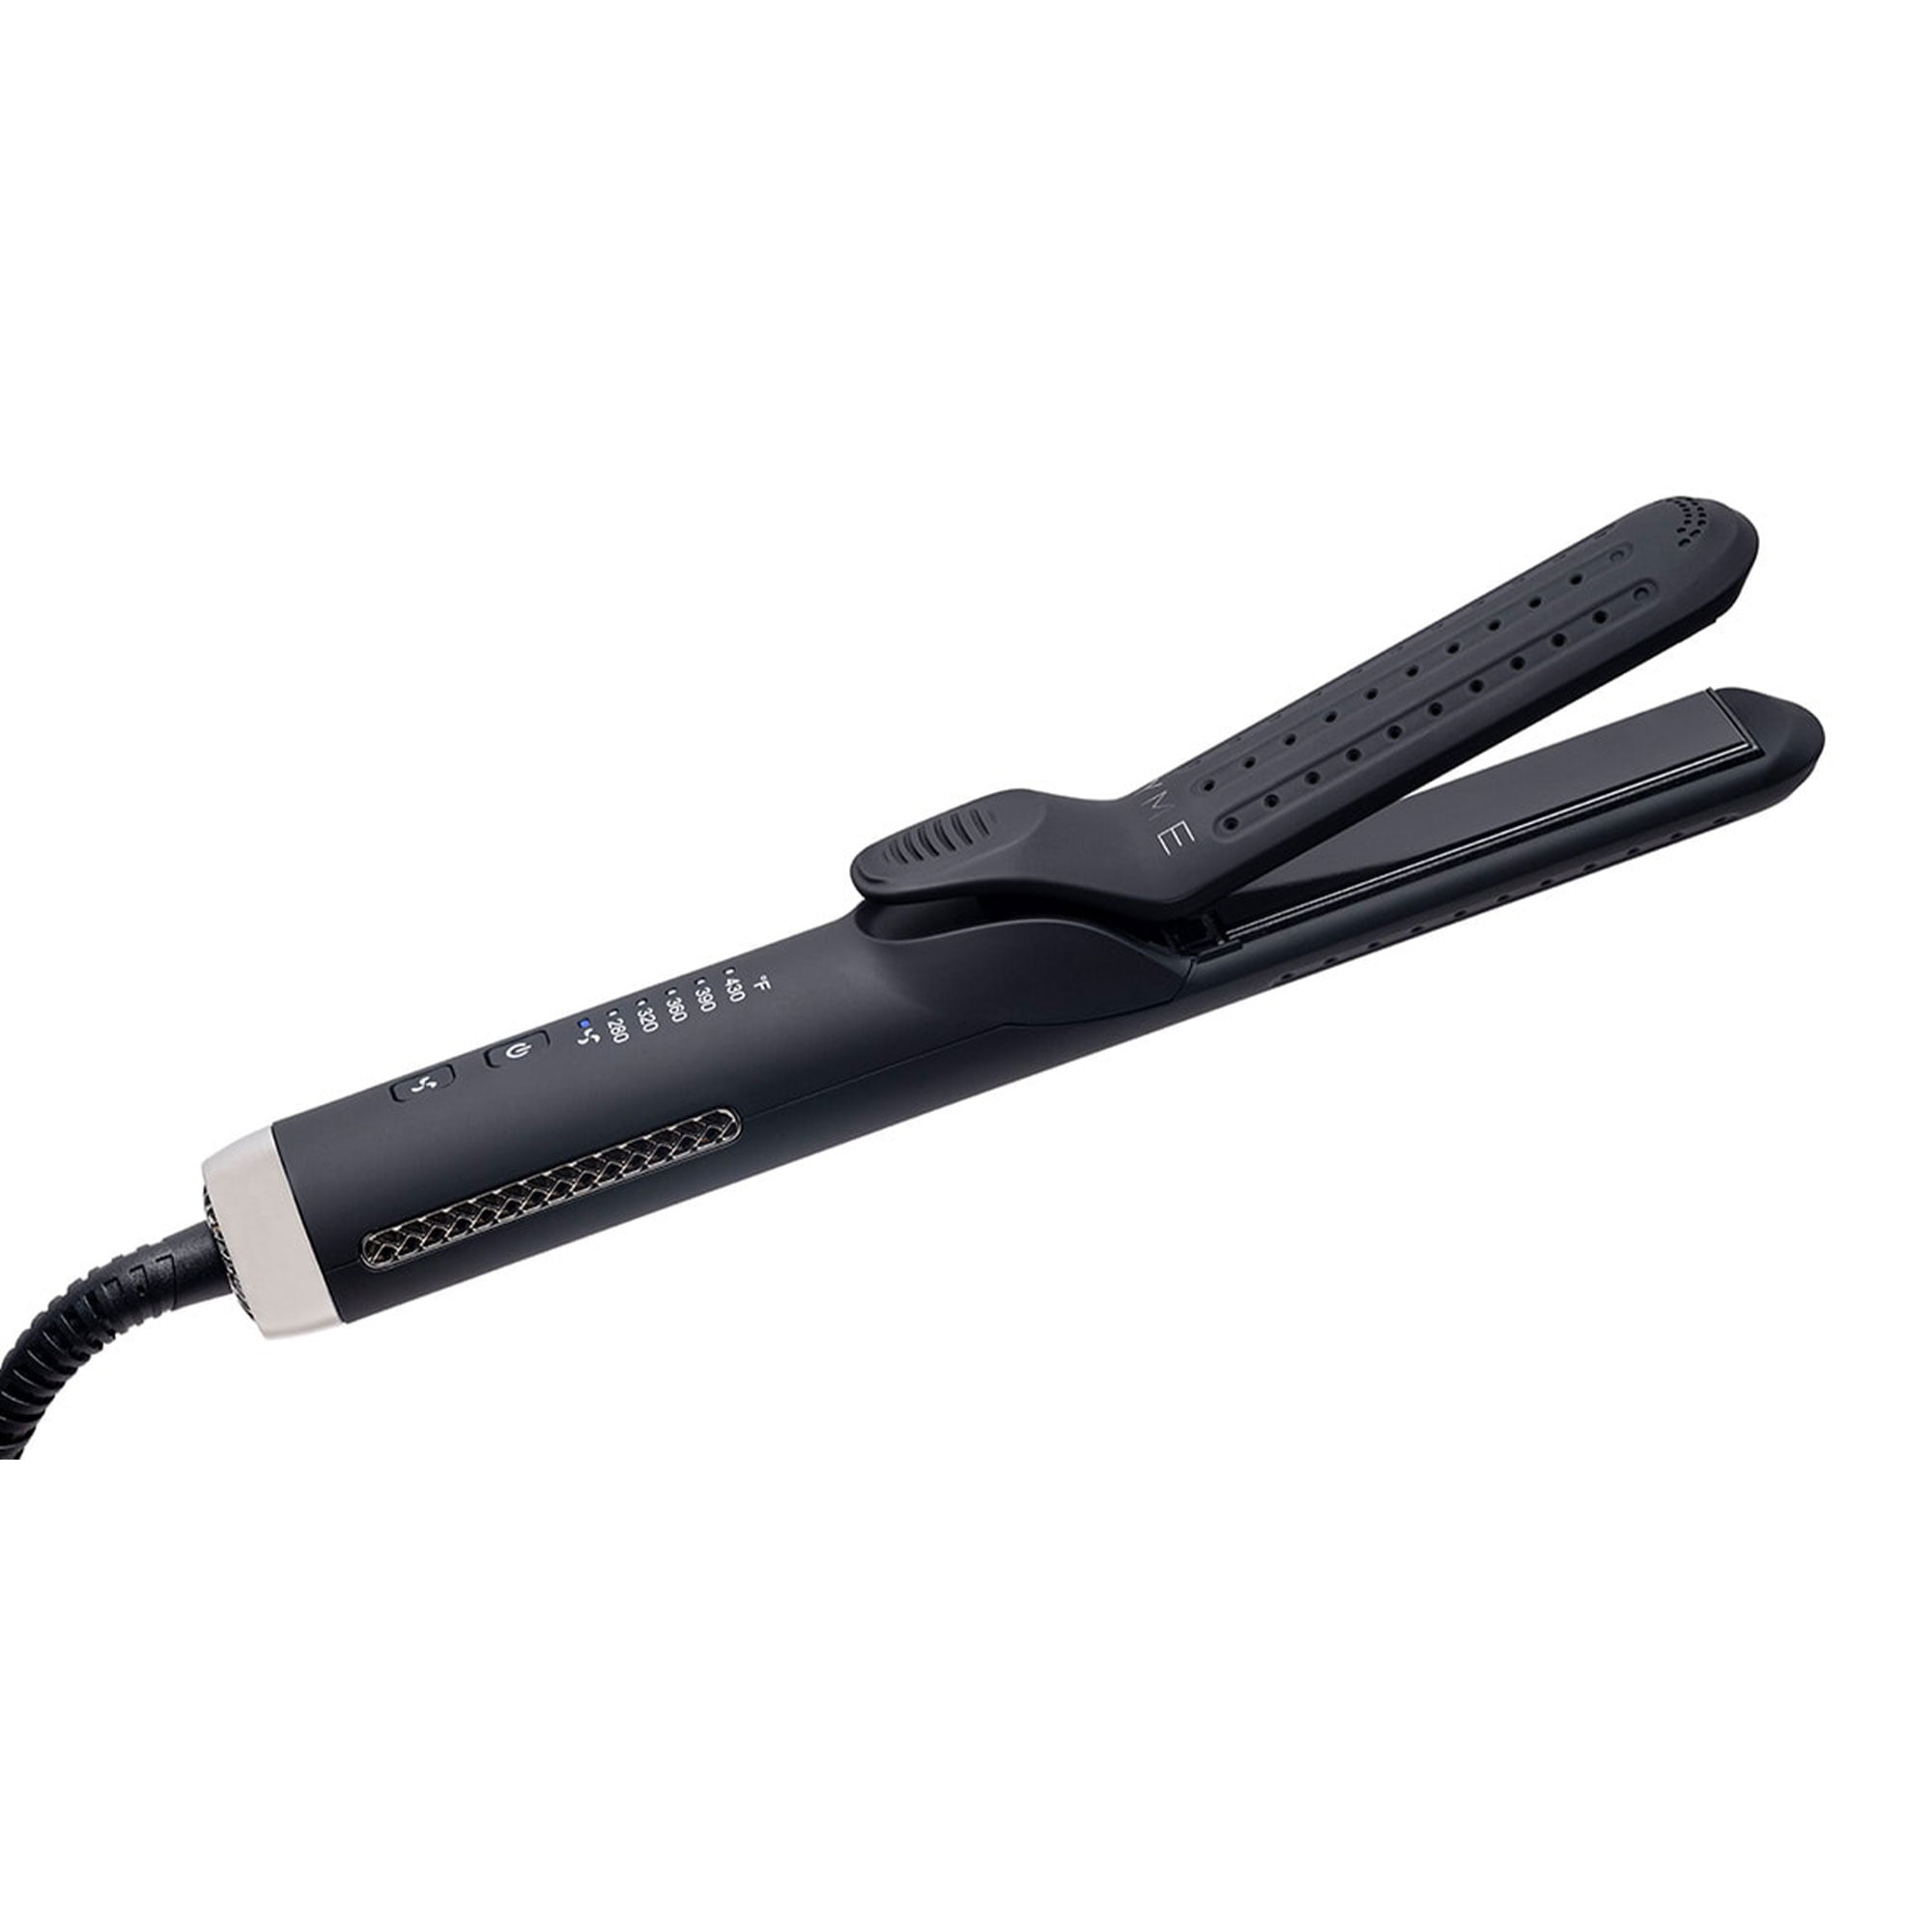 Tyme all in one styling tool